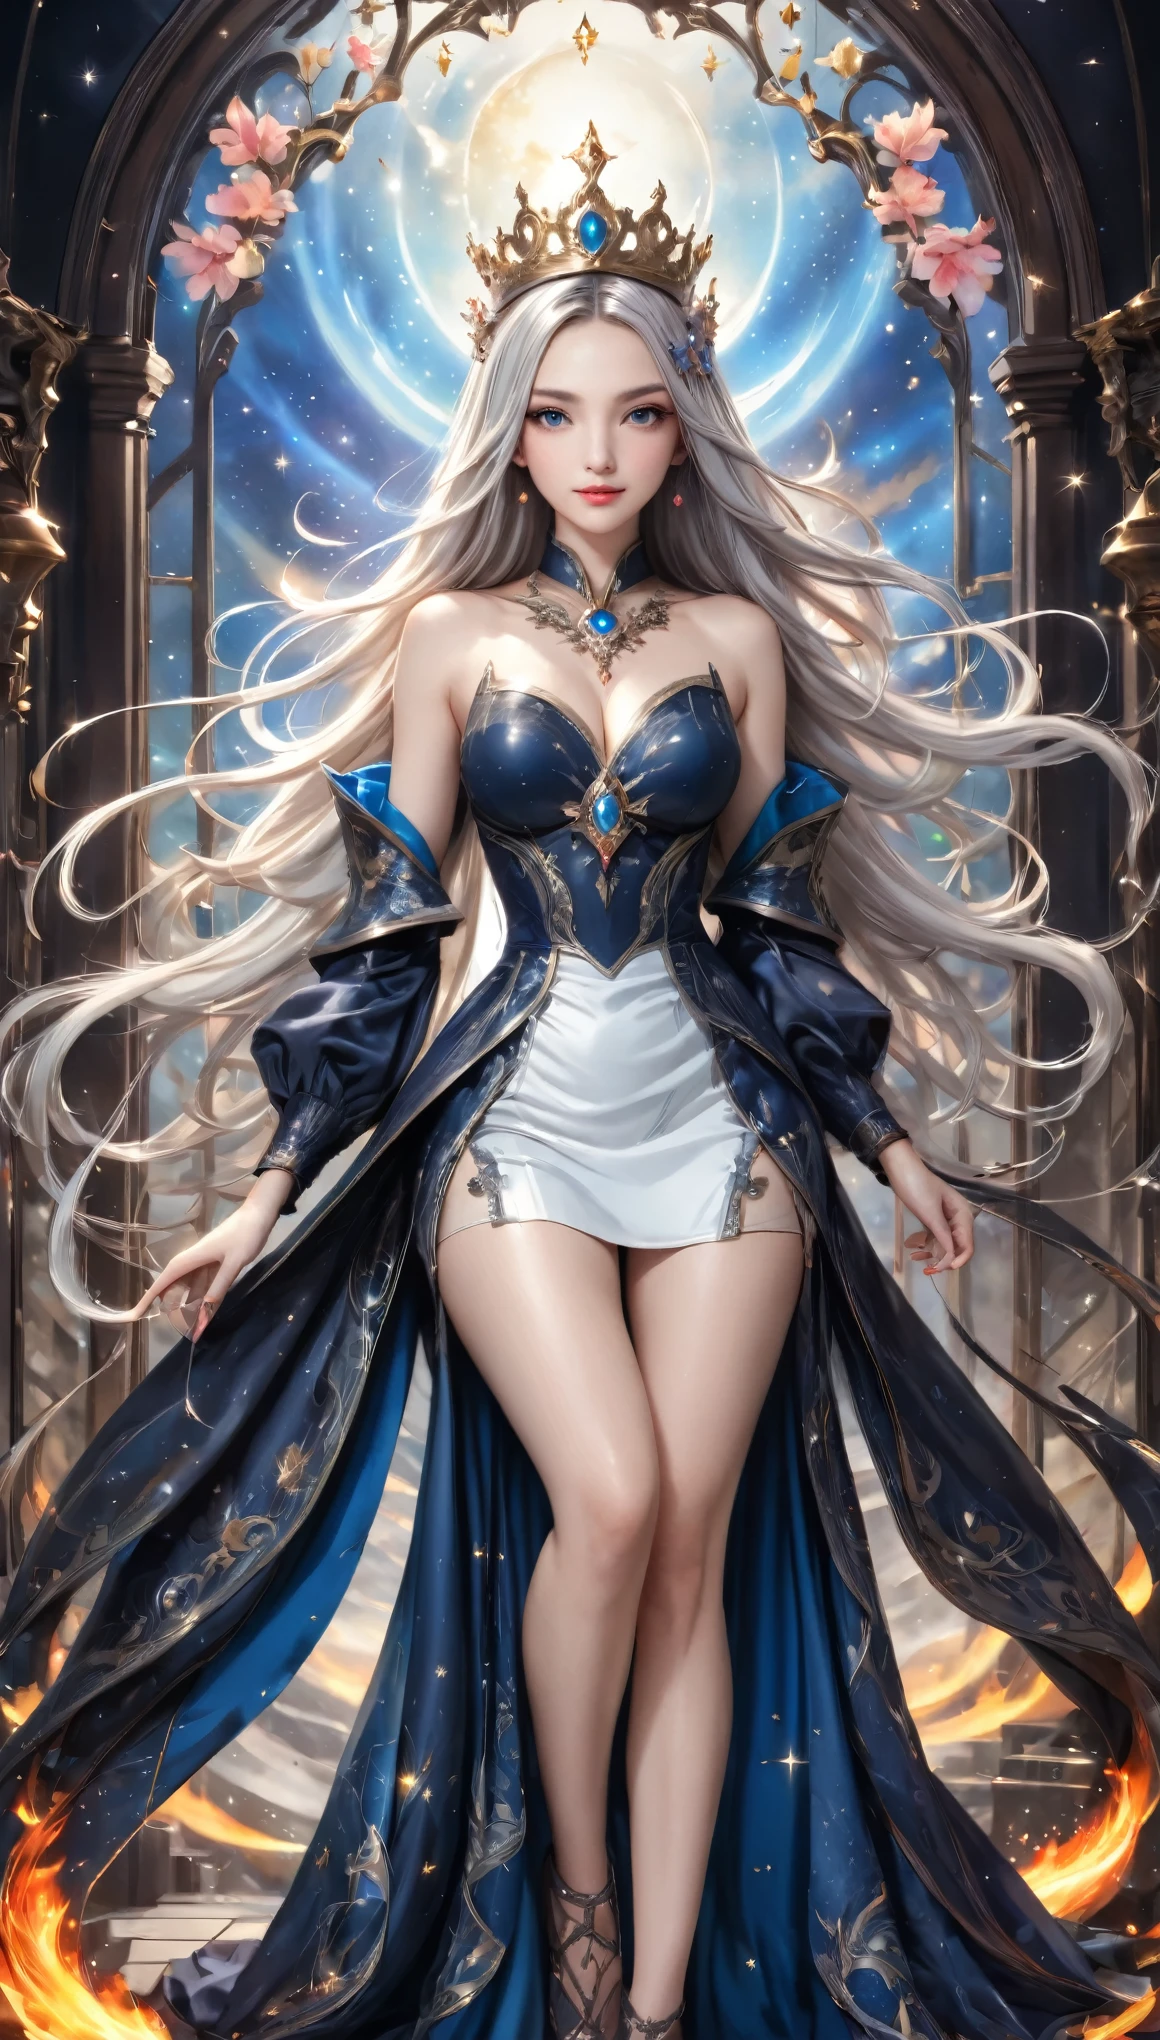 8K resolution, masterpiece, Highest quality, Award-winning works, unrealistic, From above, erotic, sole sexy lady, healthy shaped body, 22 years old, black mage, 165cm tall, huge firm bouncing busts,, white silver long wavy hair, Detailed facial depictions, BREAK, Mysterious blue eyes, Standard nose, Eyeliner, pink lips, sexy long legs, Clear skin, holy knight, Gothic ruffle long dress, A dress with a complex structure, Seven-colored colorful dress, Clothed in flames, royal coat of arms, elegant, Very detailed, Delicate depiction of hair, miniature painting, Digital Painting, artstation concept art, Smooth, Sharp focus, shape, Art Jam、Greg Rutkowski、Alphonse Mucha's、William Adolphe Bouguereau、art：Stephanie Law , Royal Jewel, nature, Symmetric, Greg Rutkowski, Charlie Bowwater, Unreal, surreal, Dynamic Lighting, Fantasy art, Complex colors, Colorful magic circle, flash, dynamic sexy poses, A kind smile, Mysterious Background, Aura, A gentle gaze, BREAK, Small faint lights and flying fireflies, night, lanthanum, From above, looking down on the world below, Starry Sky, milky way, nebula, shooting star